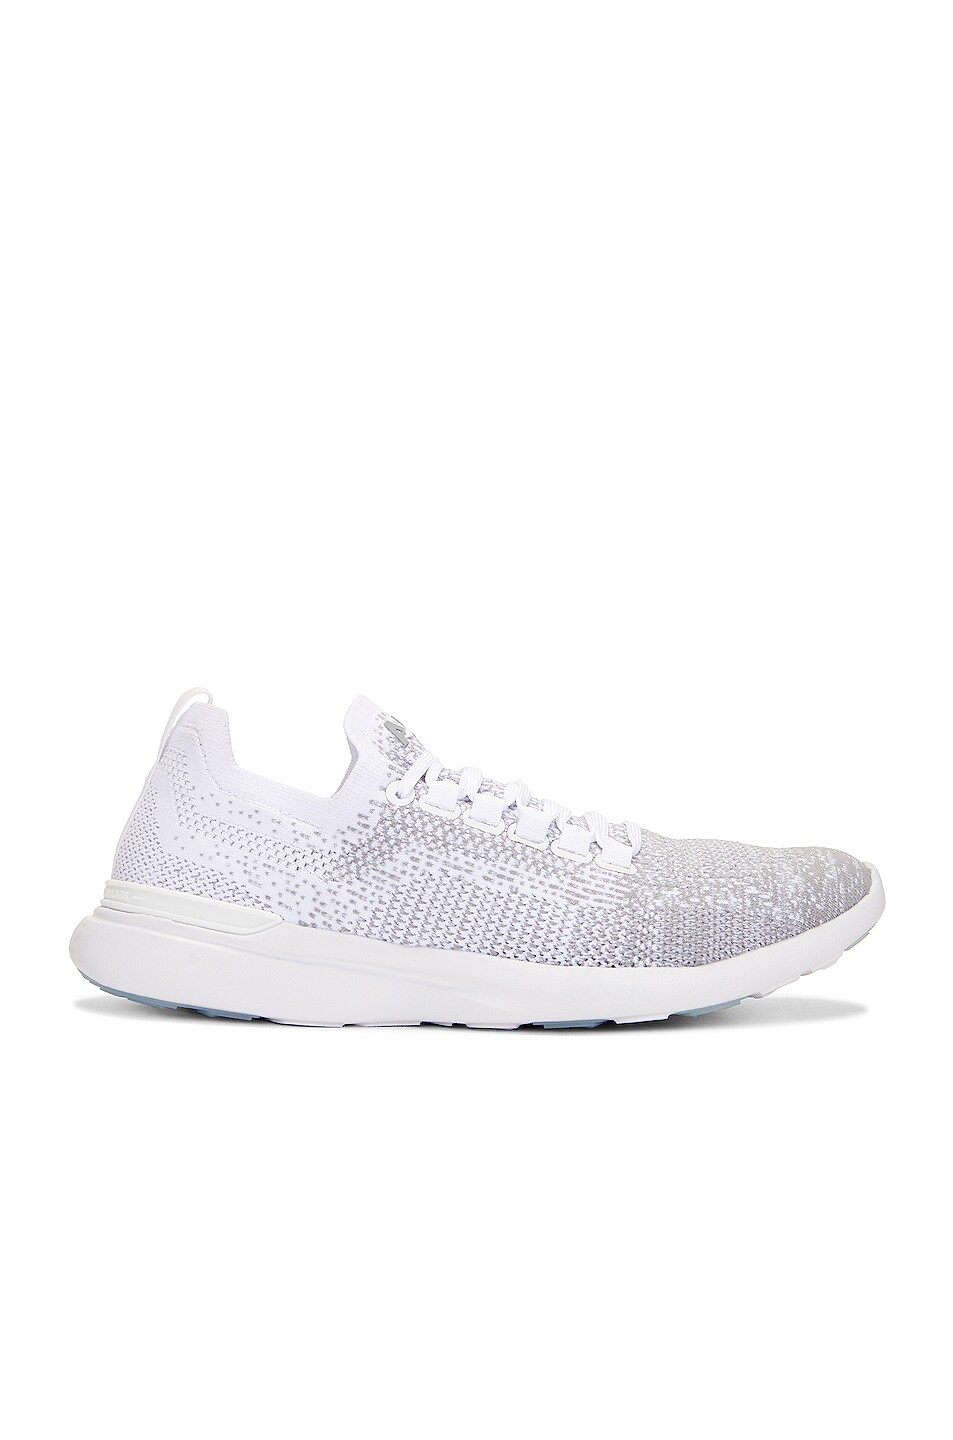 Image 1 of APL: Athletic Propulsion Labs Techloom Breeze in White, Cement, & Ombre